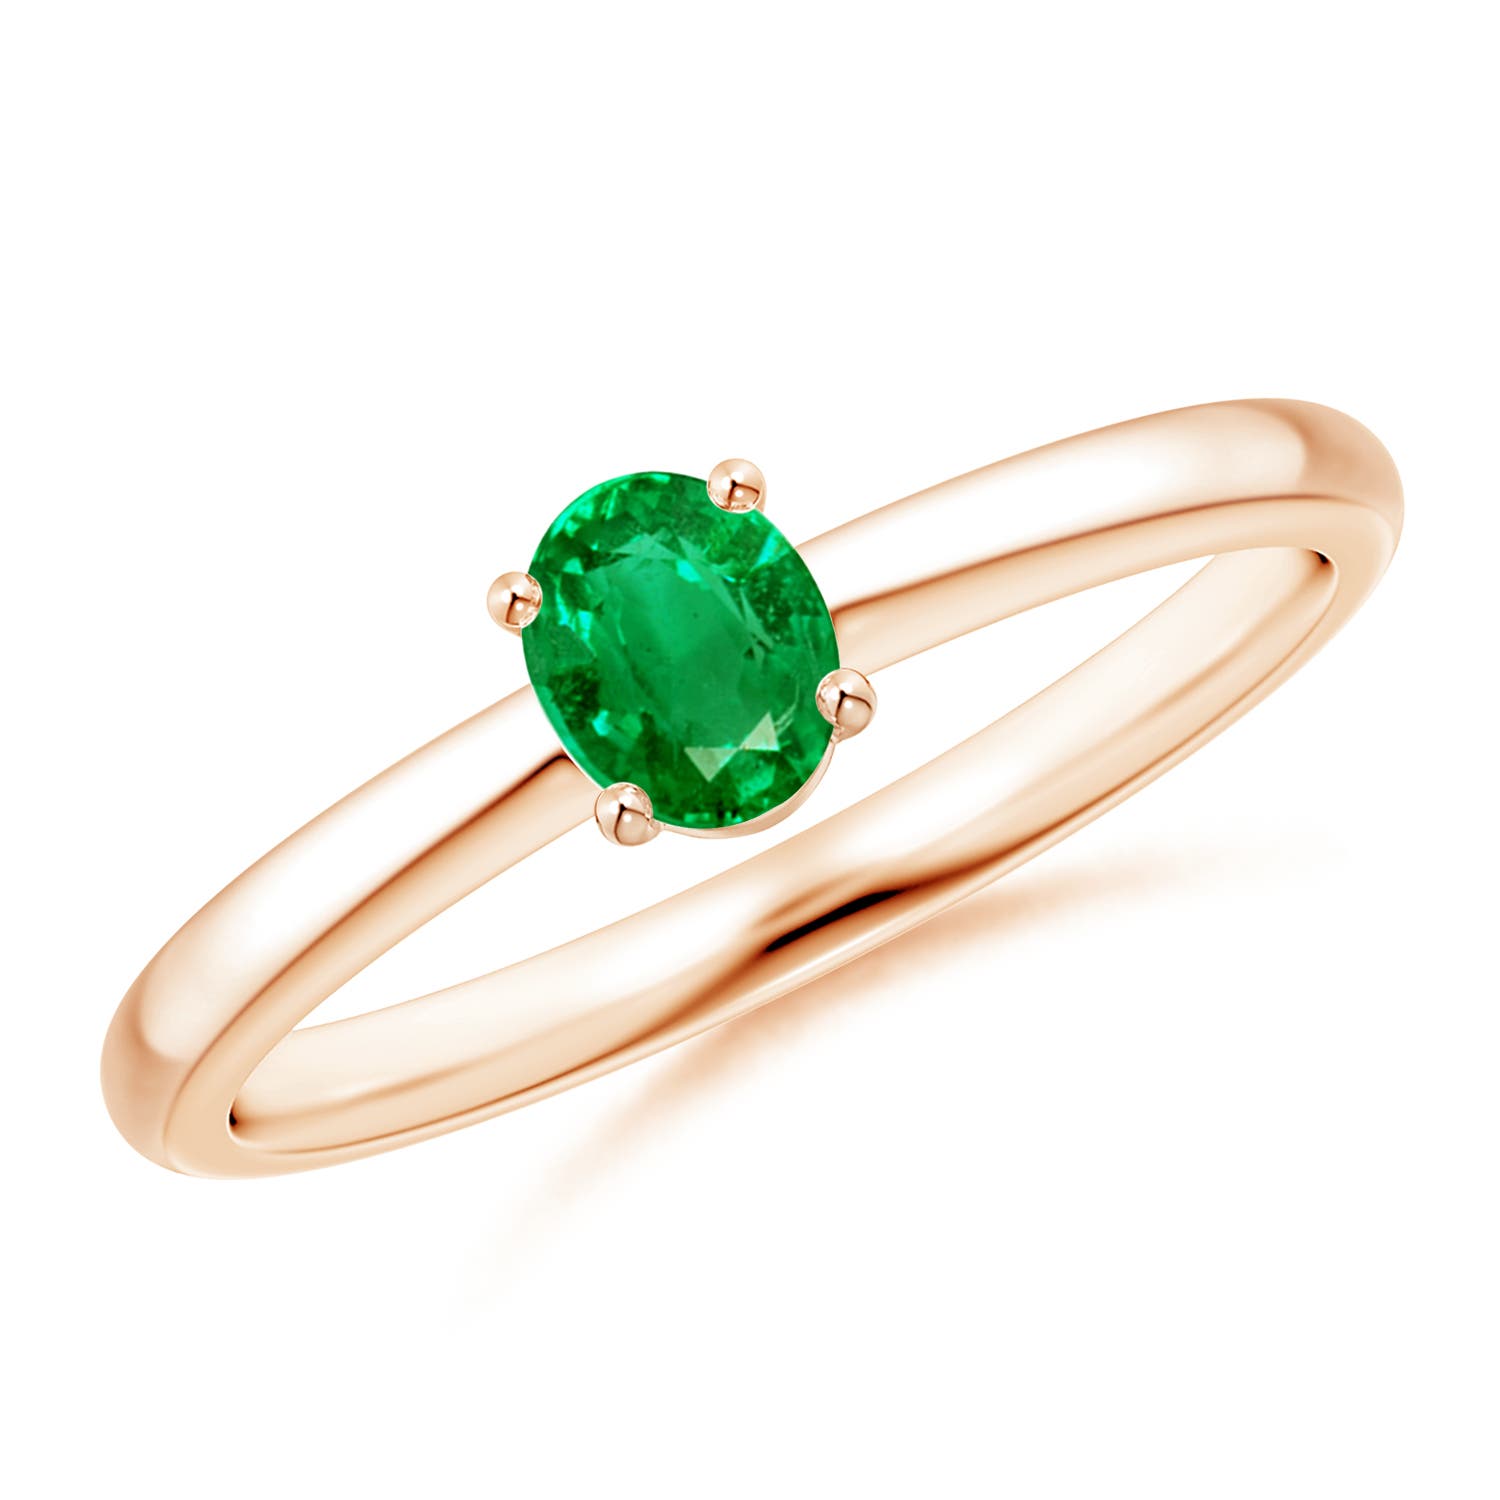 AAA - Emerald / 0.3 CT / 14 KT Rose Gold